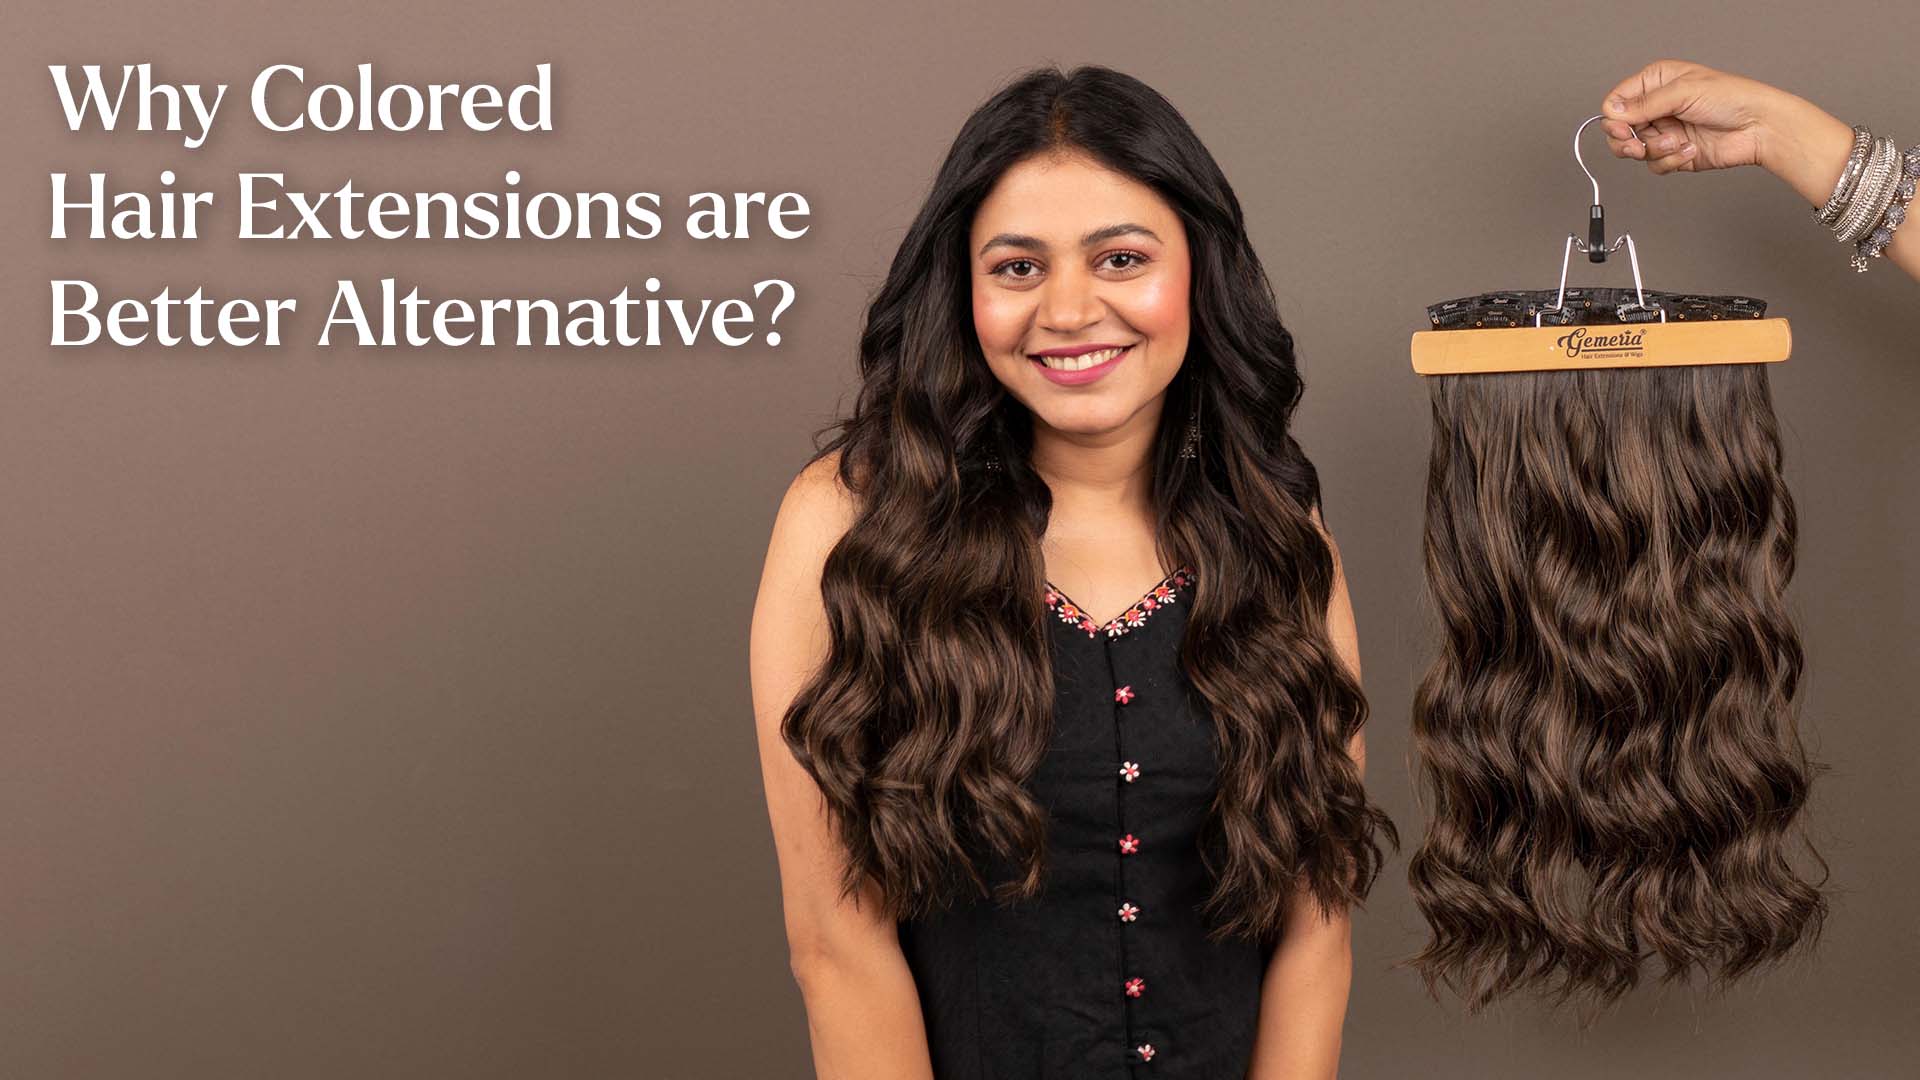 Why Colored Hair Extensions Are a Better Alternative to Dyeing Your Hair?